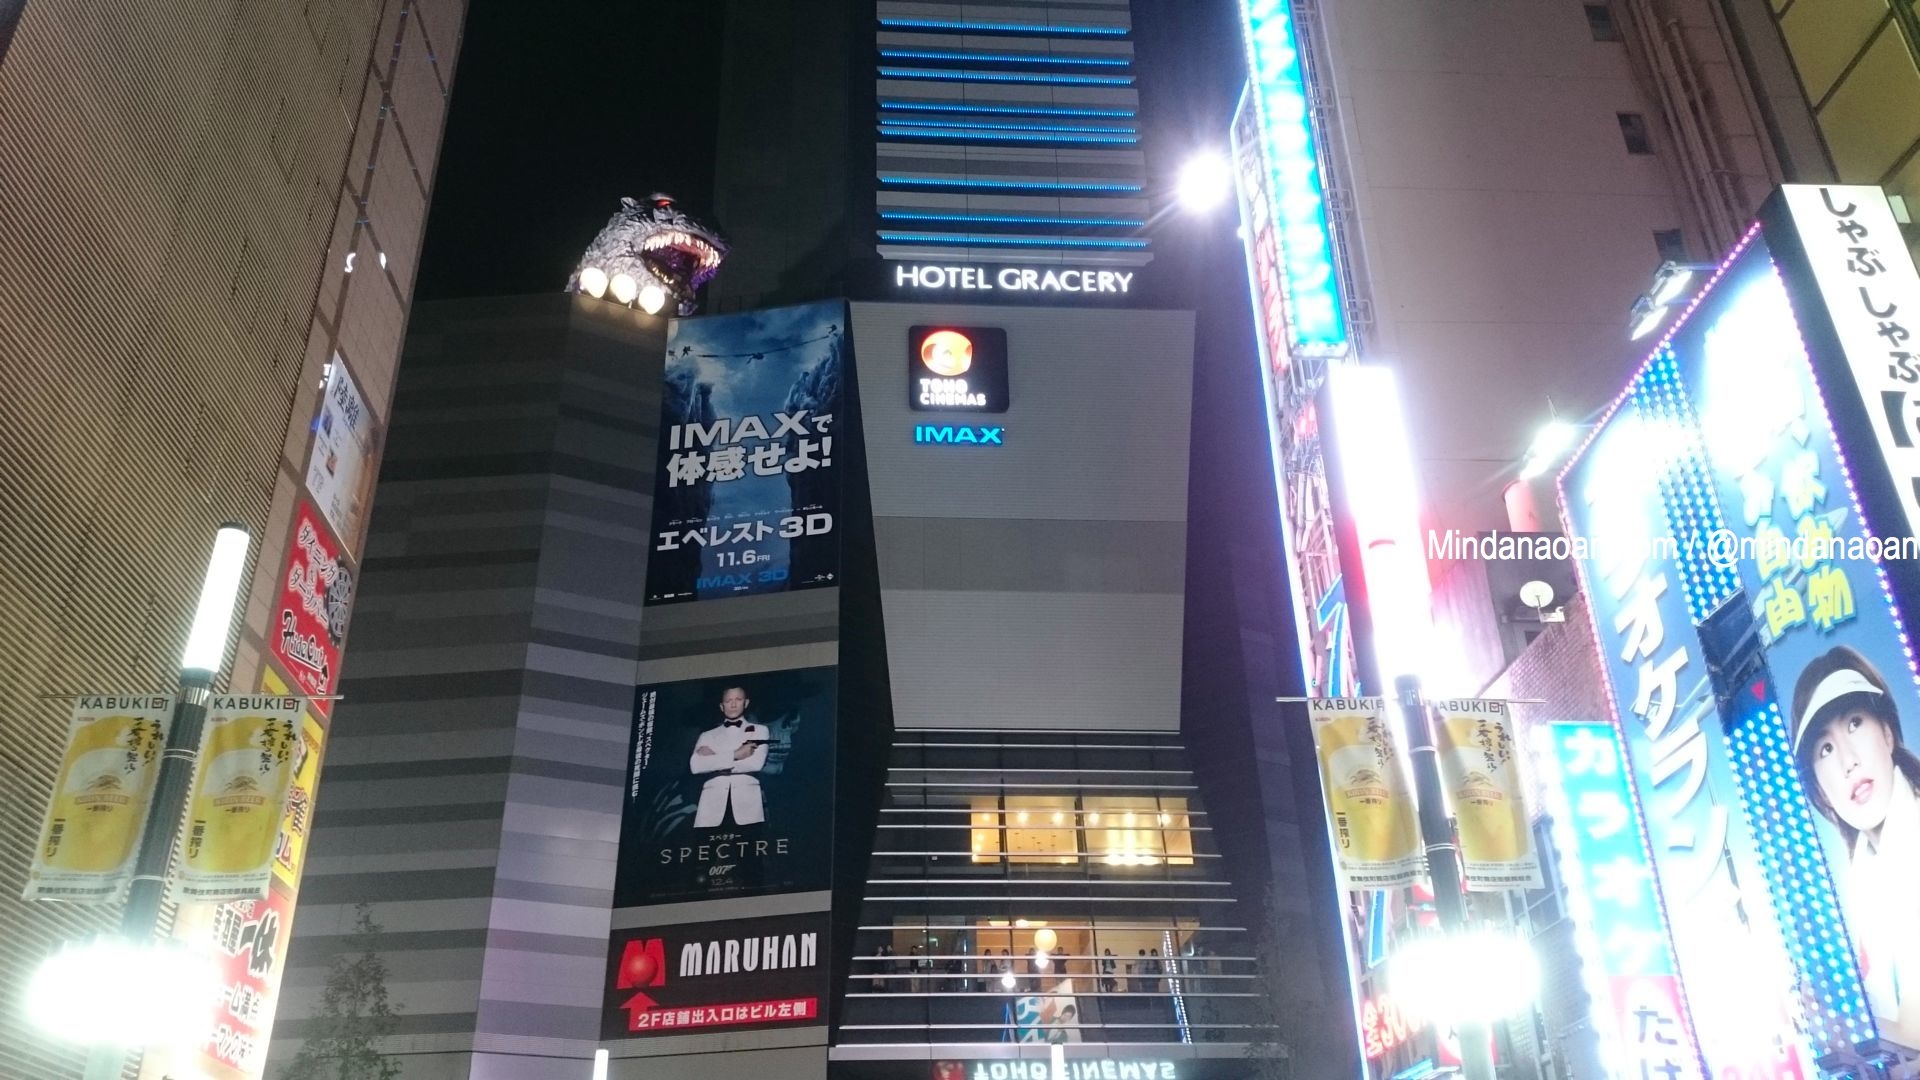 Finding the Godzilla themed hotel in Tokyo Japan